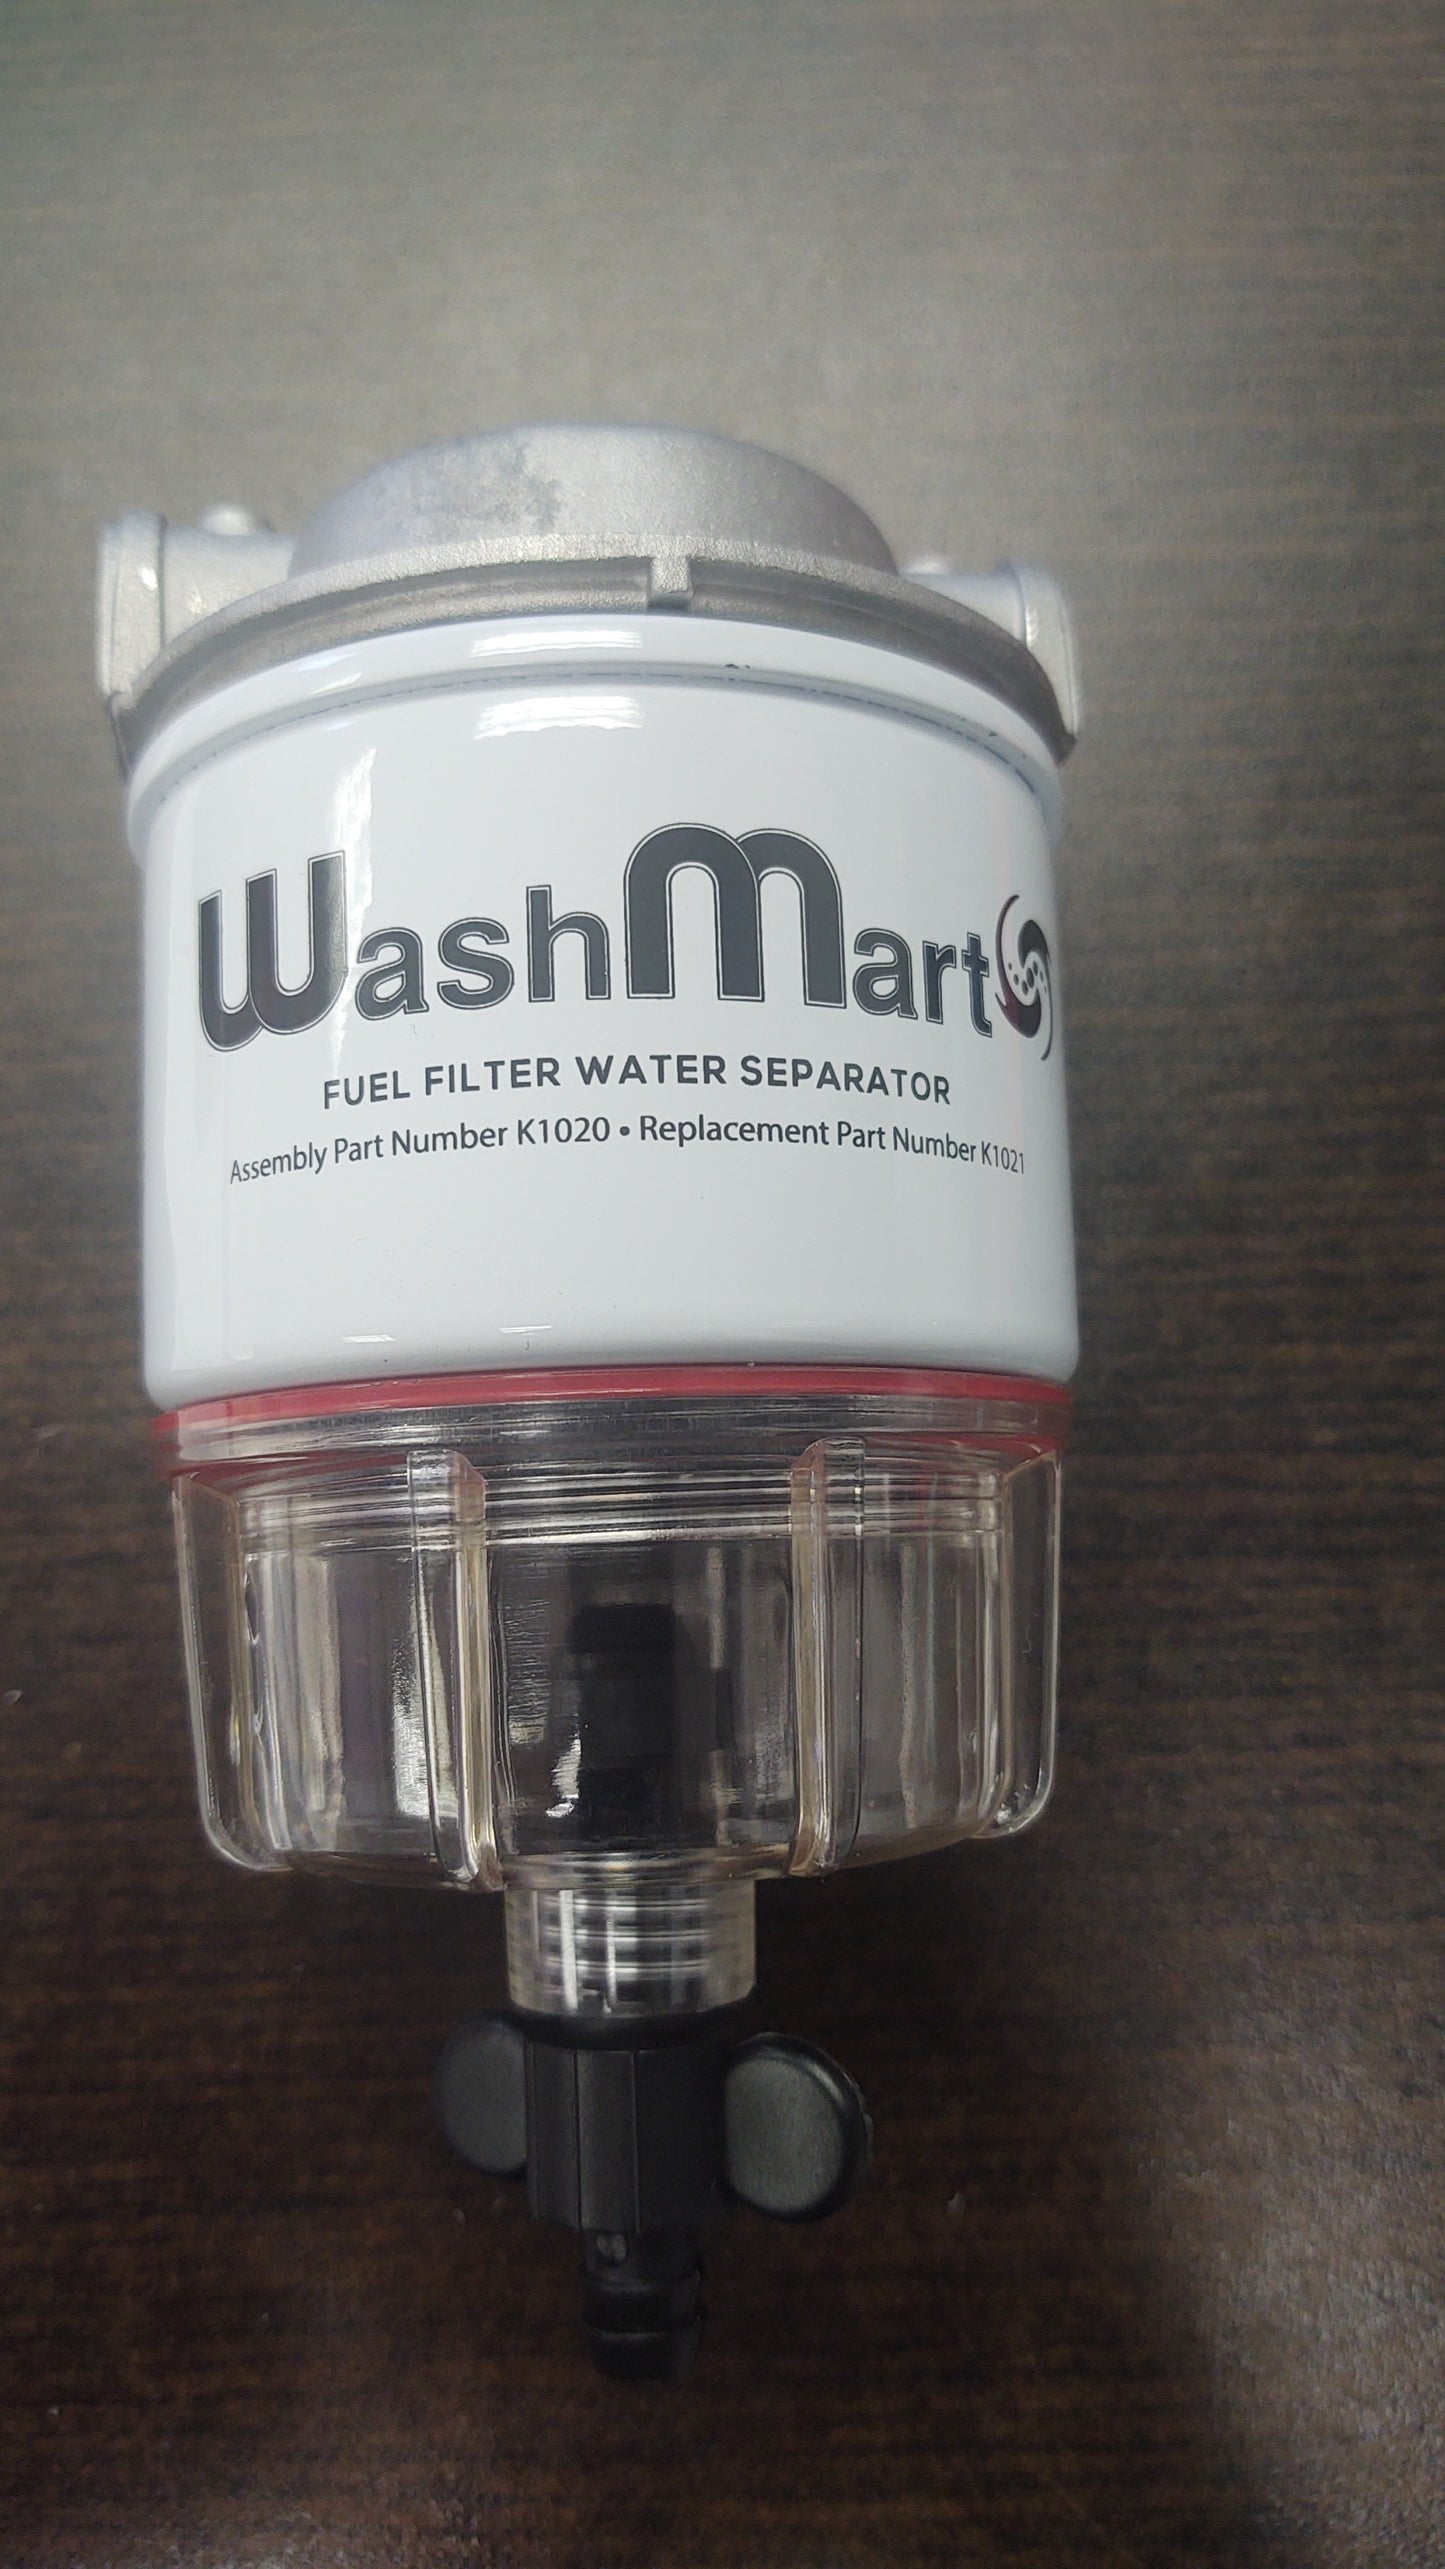 Fuel filter and housing - WashMart